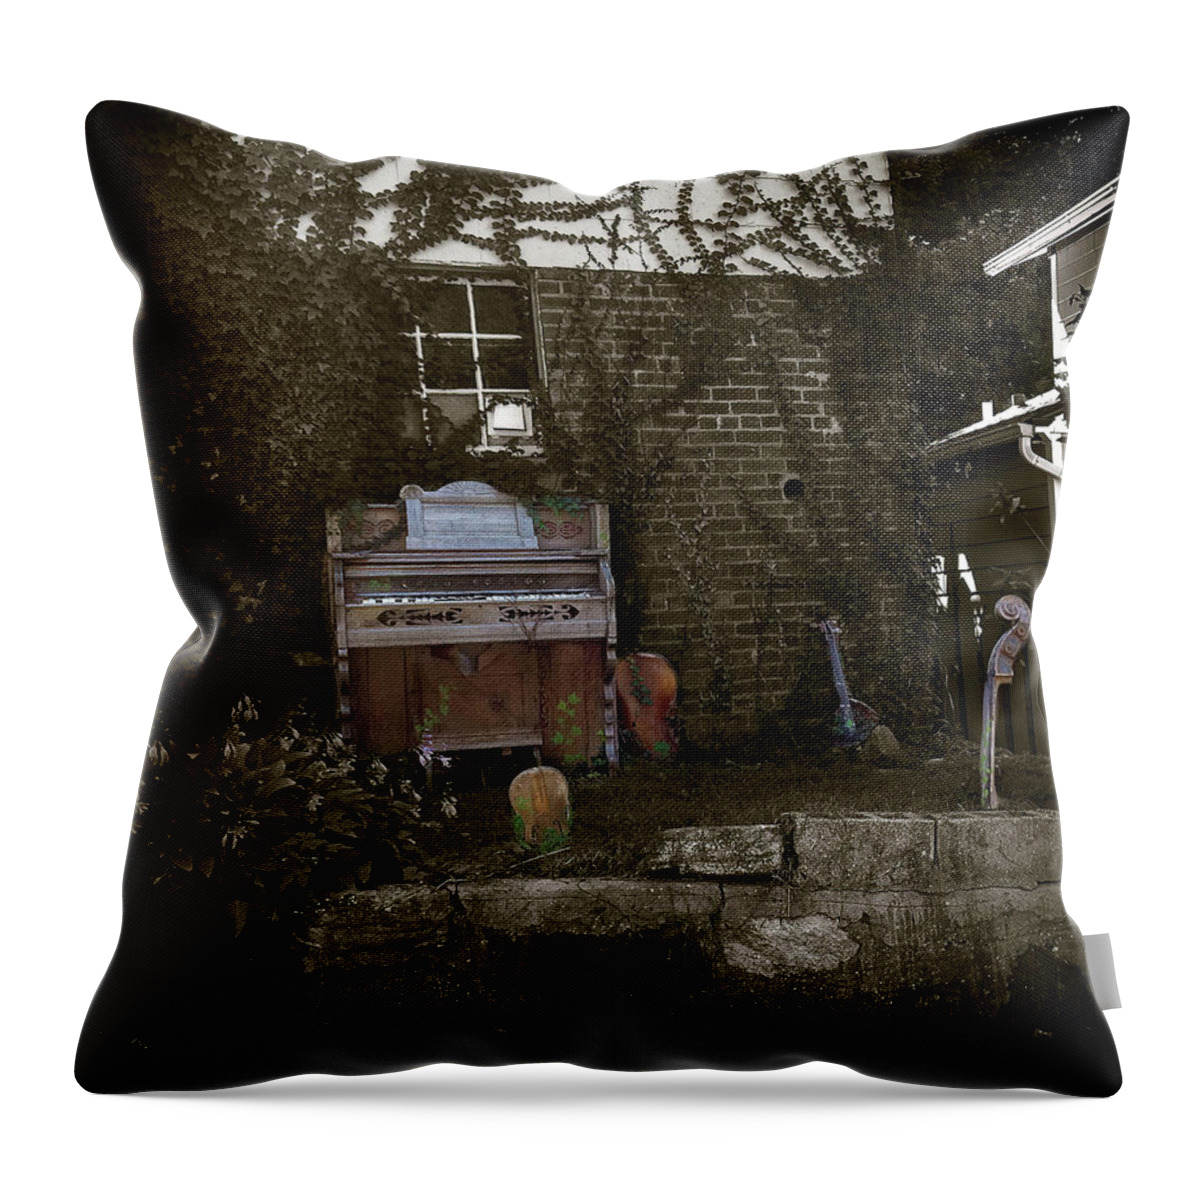 Music Throw Pillow featuring the photograph Yard Music by Wayne King